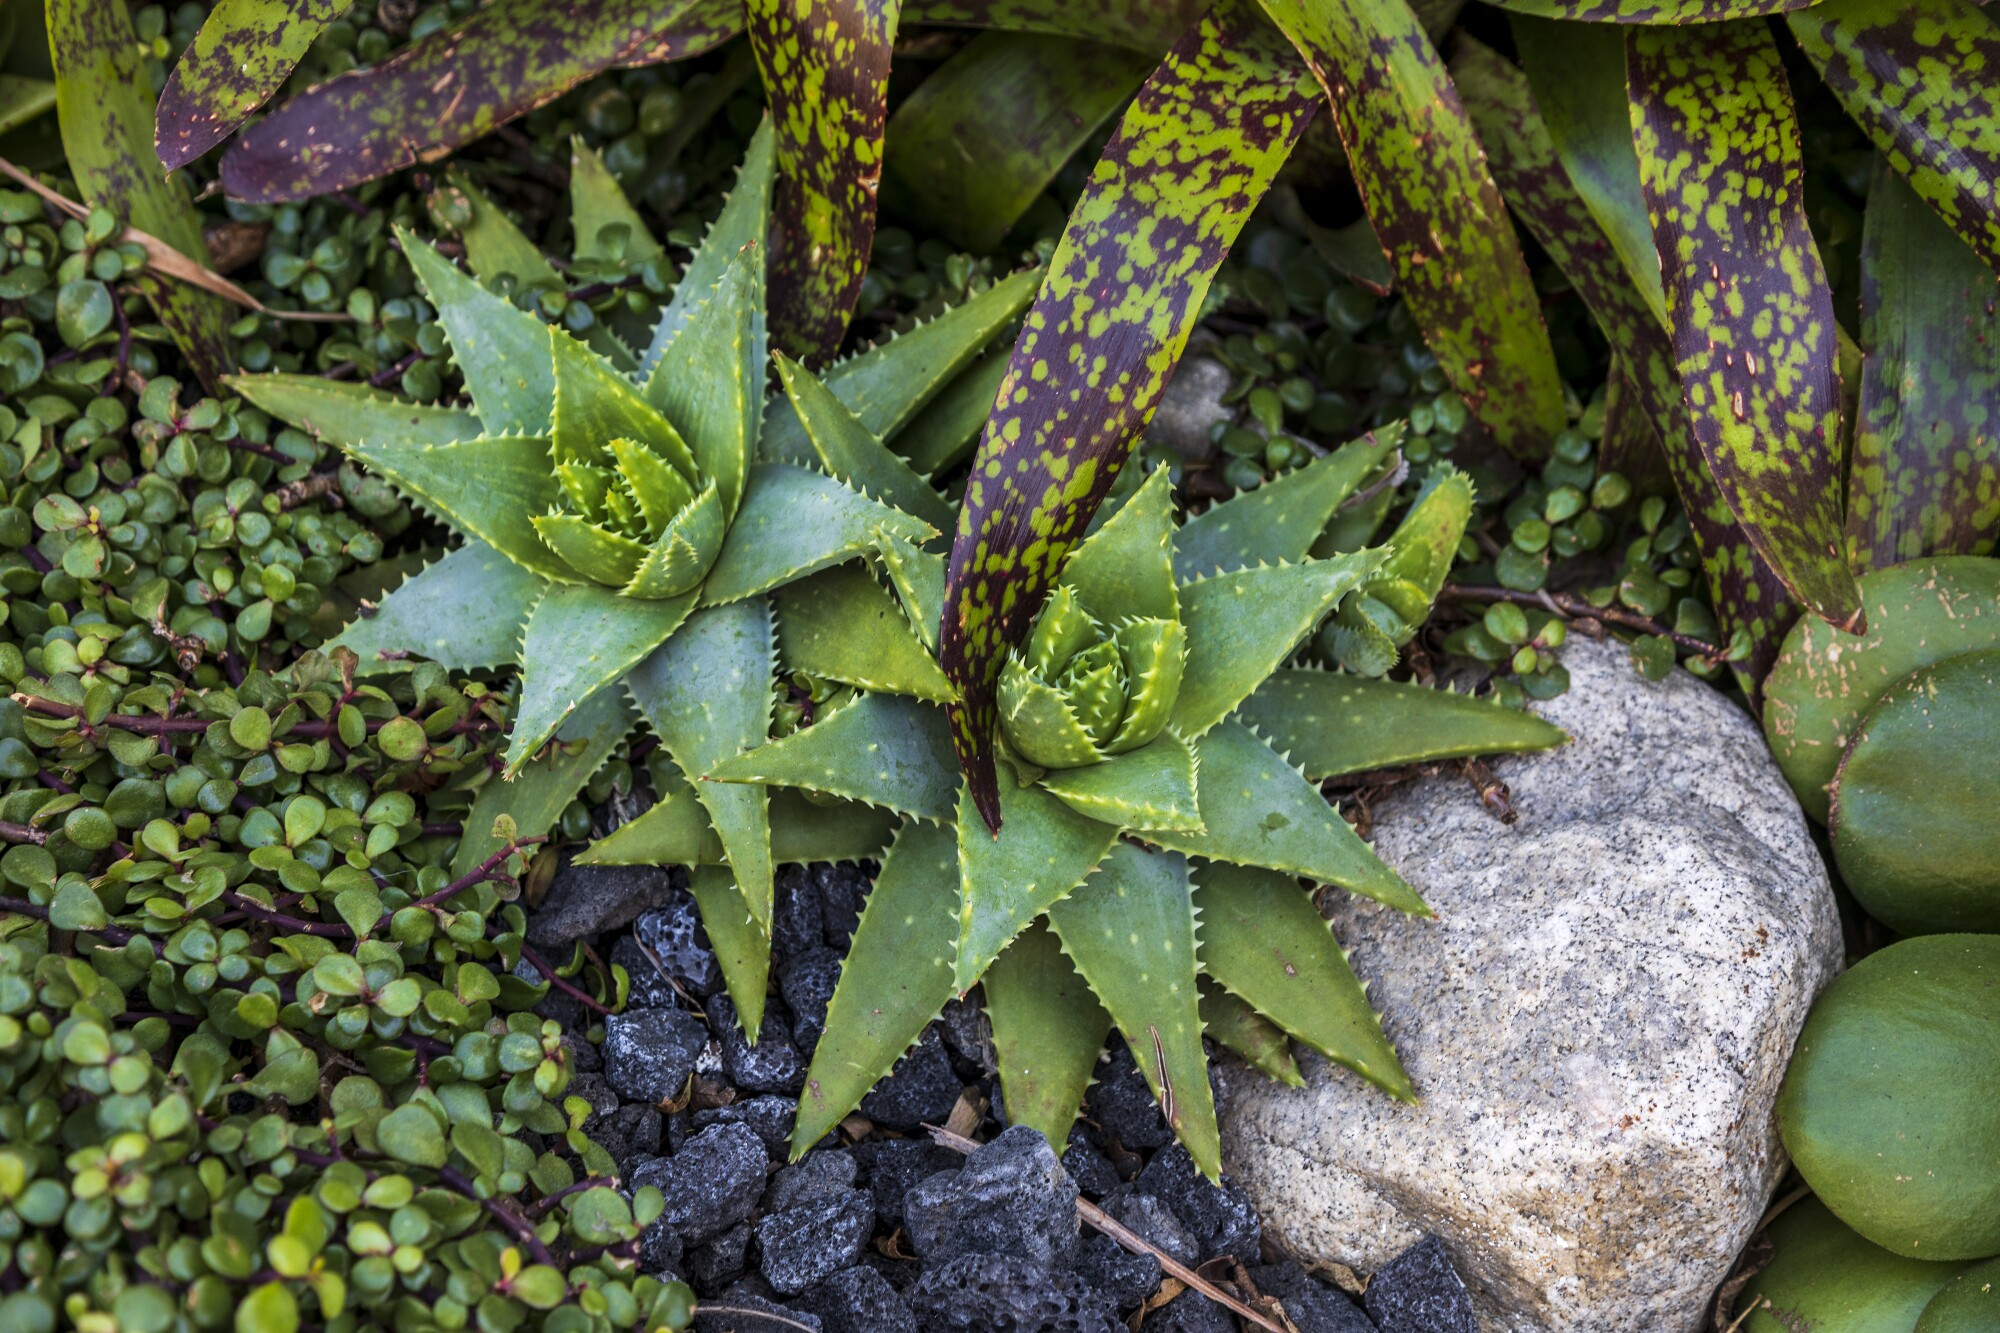 A pair of Aloe brevifolia succulents growing next to a purple-leaved bromeliad and elephant bush (Portulacaria afra)